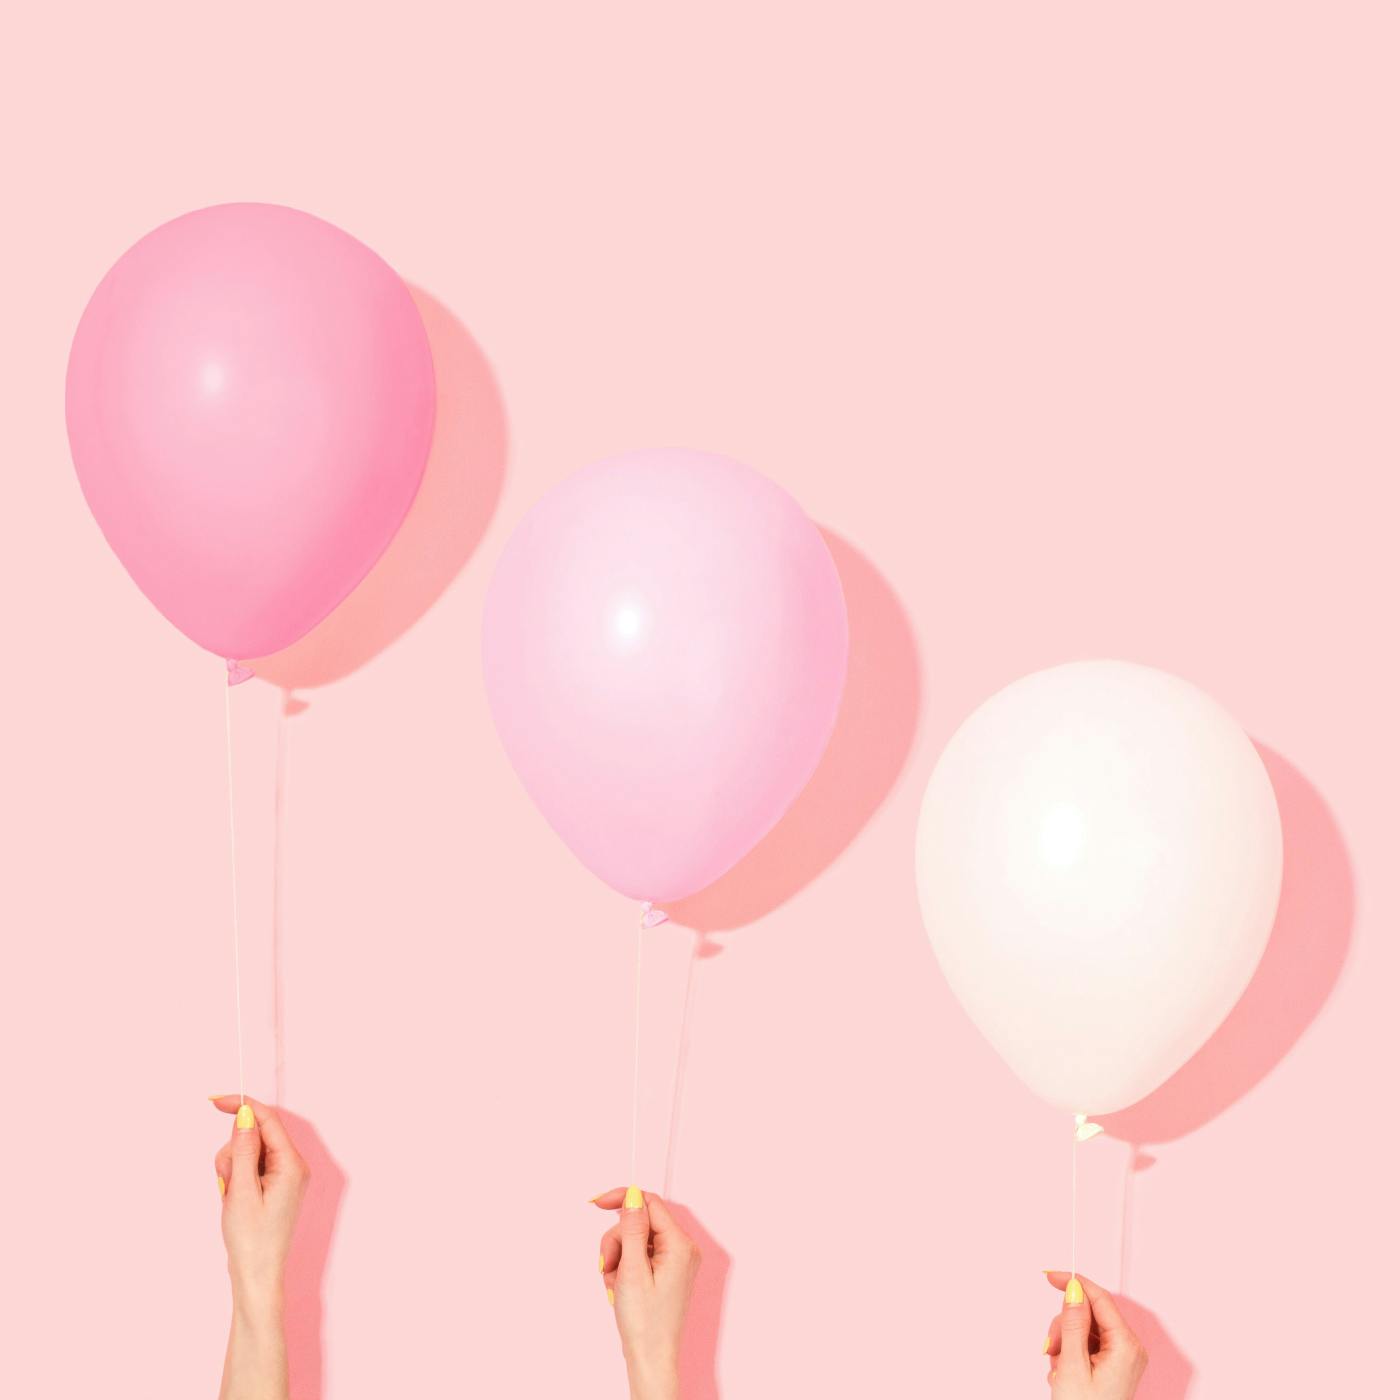 3 hands holding 3 balloons, pink, pale pink and white, against a light peach wall